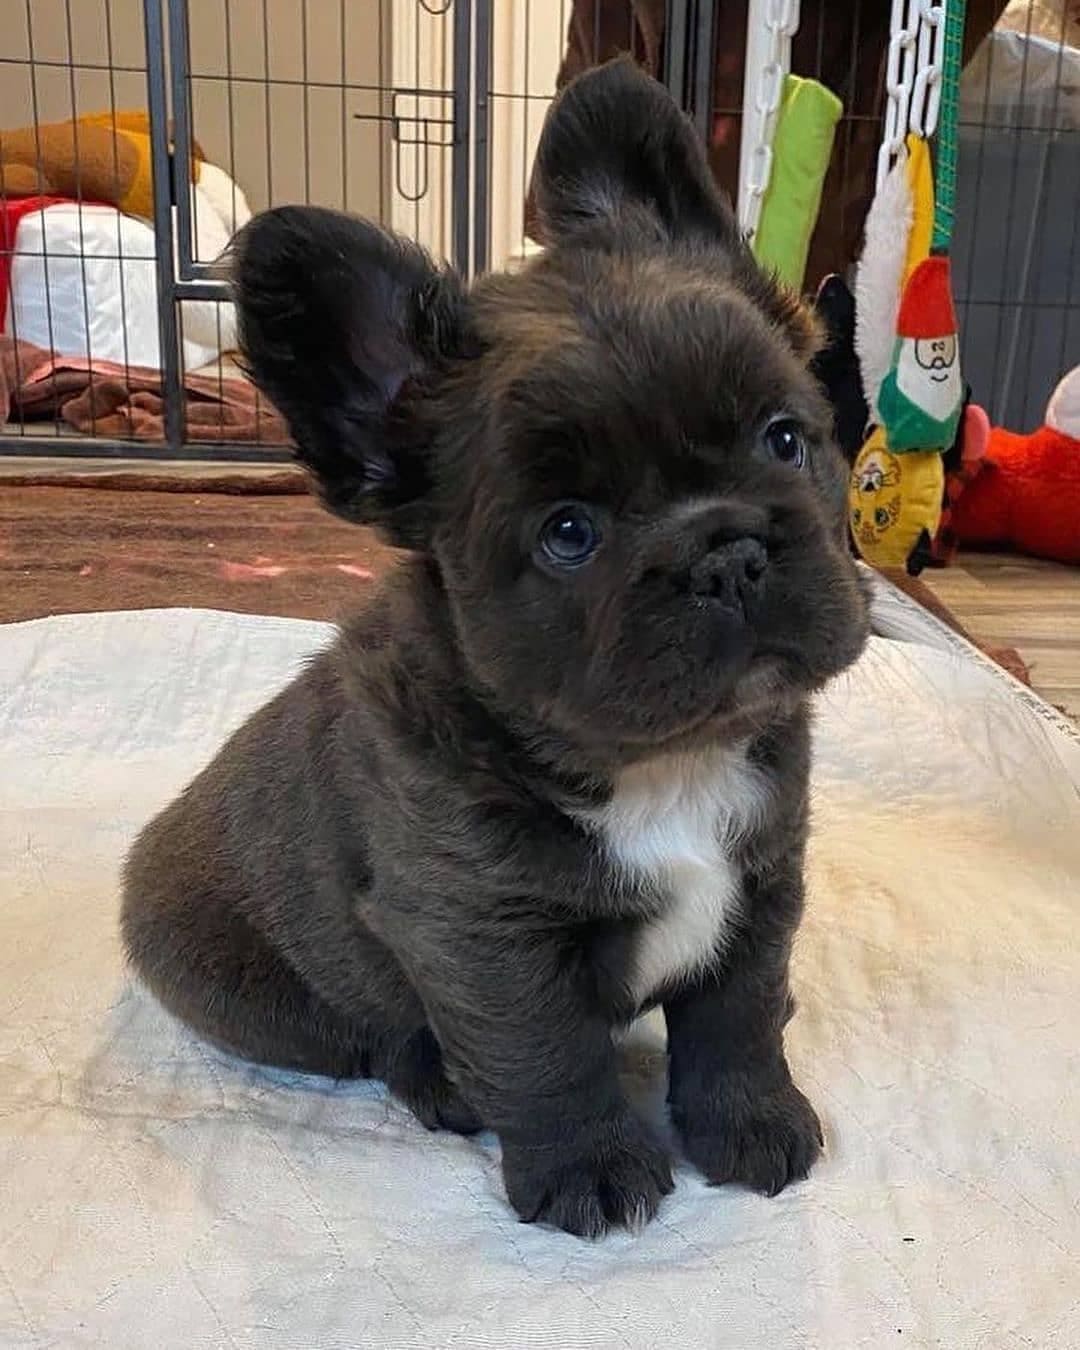 Even seen a fluffy frenchie before? <3